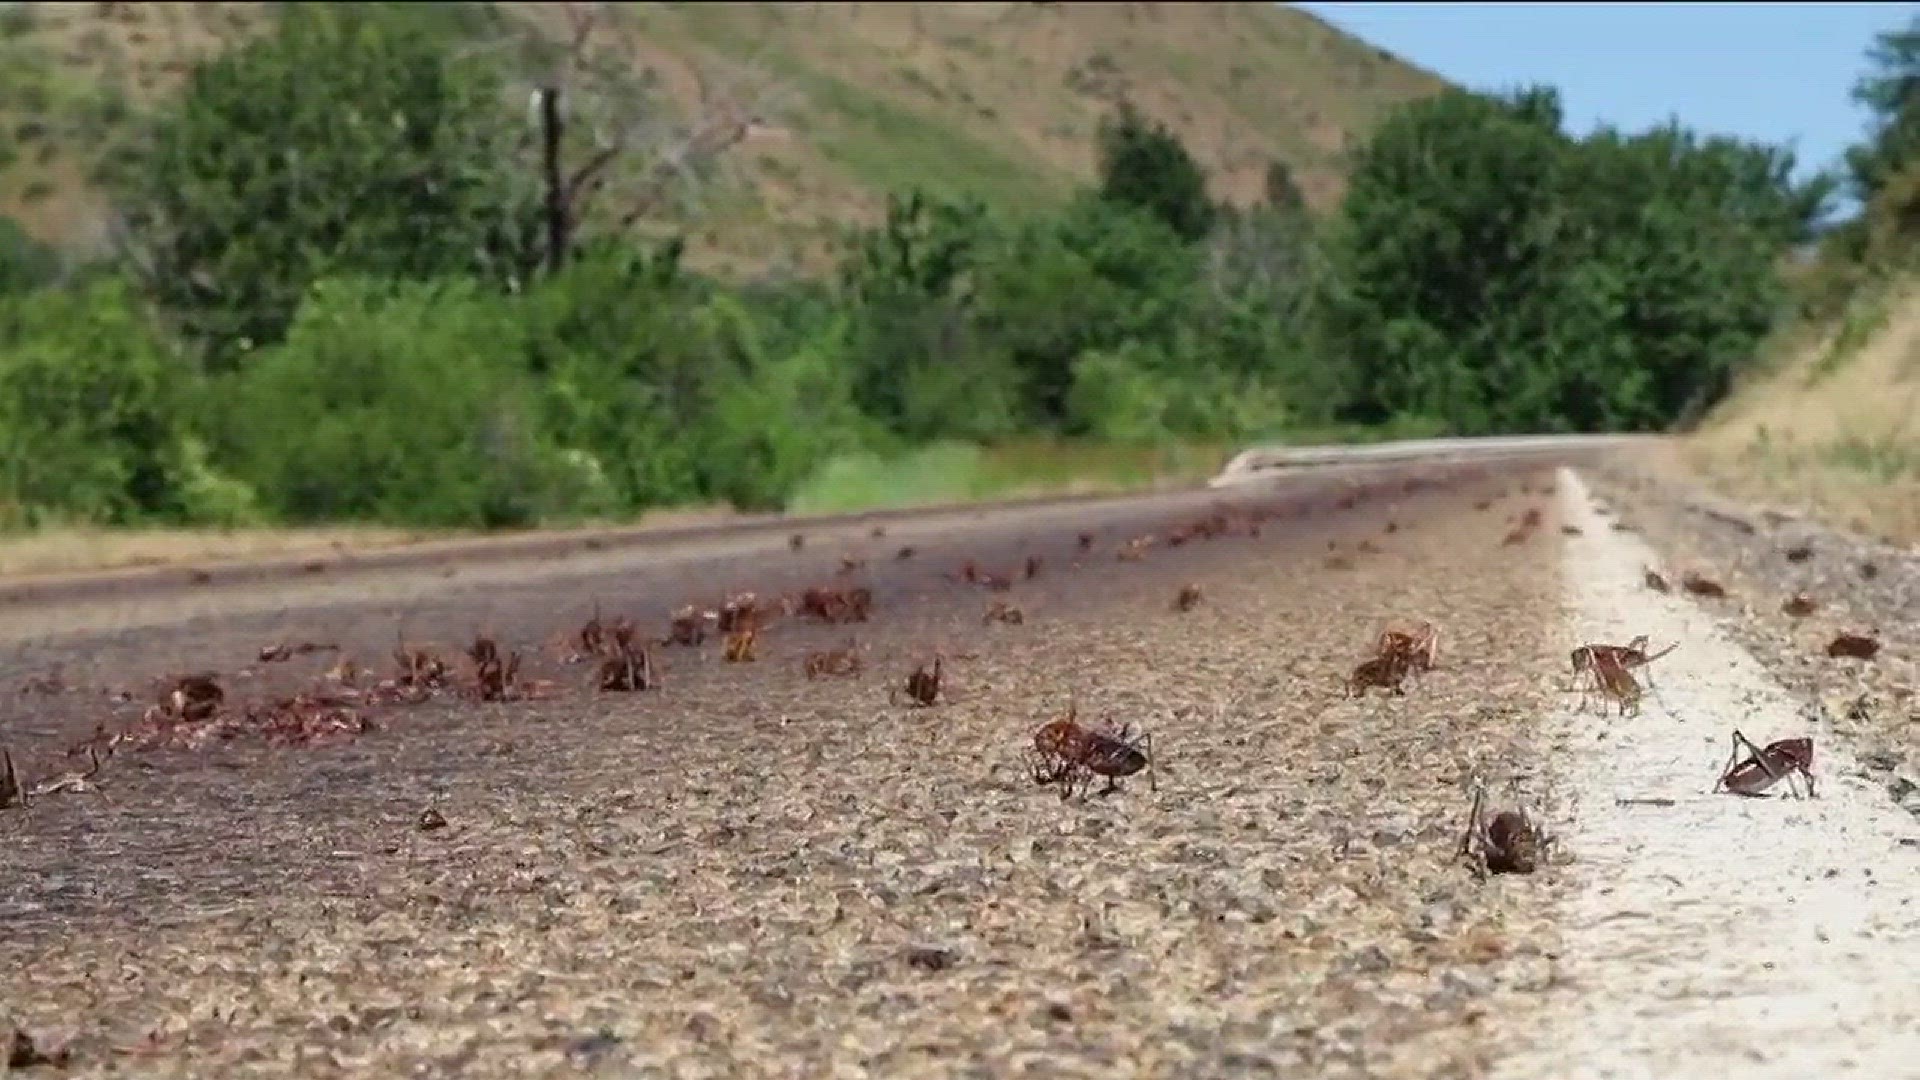 Mormon crickets causing "icy-like" conditions on Idaho roads